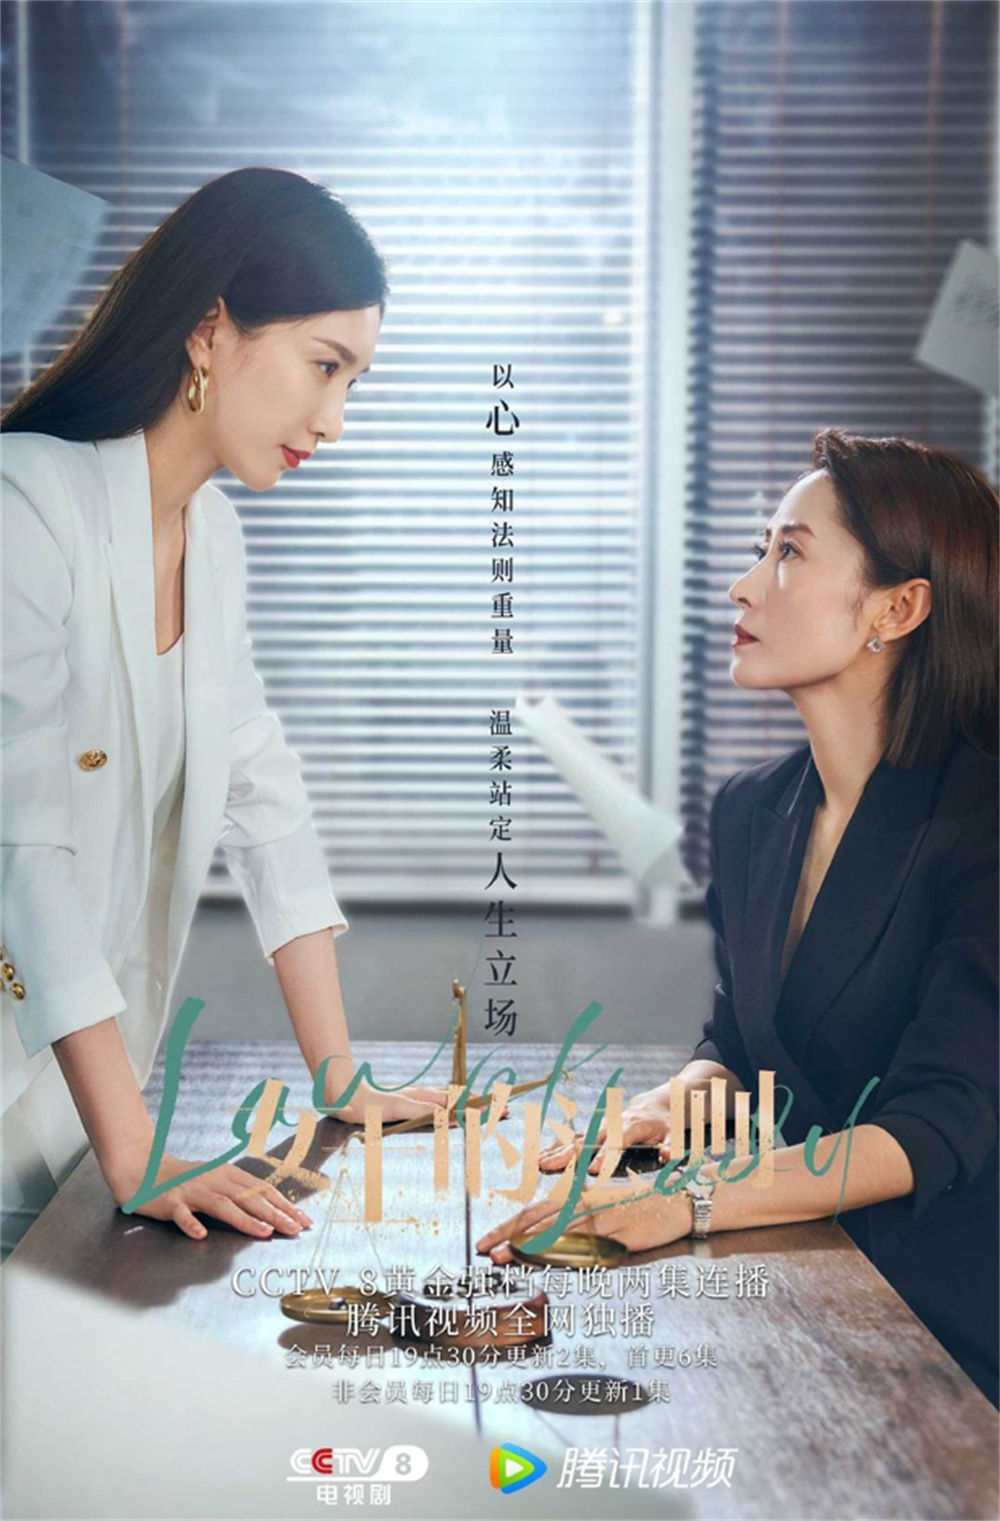 The Lady's Law poster